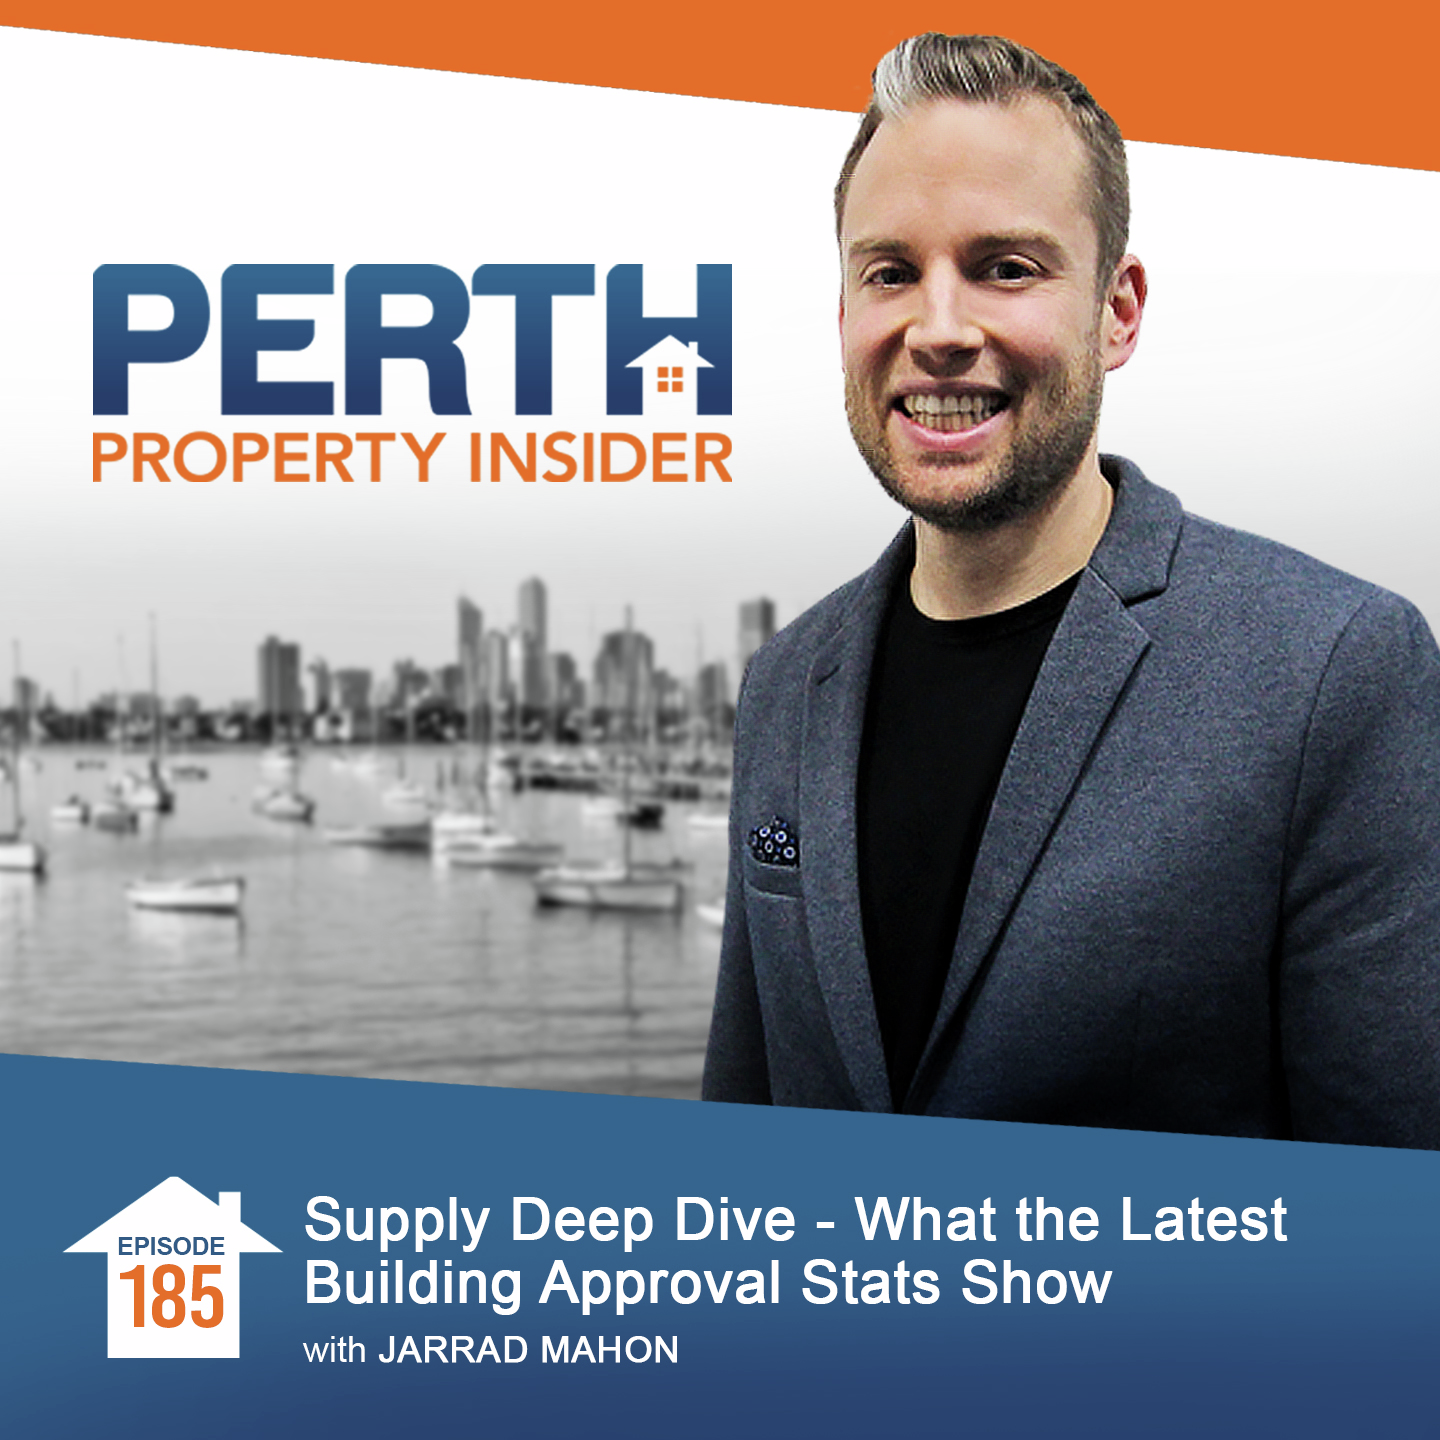 Supply Deep Dive - What the Latest Building Approval Stats Show